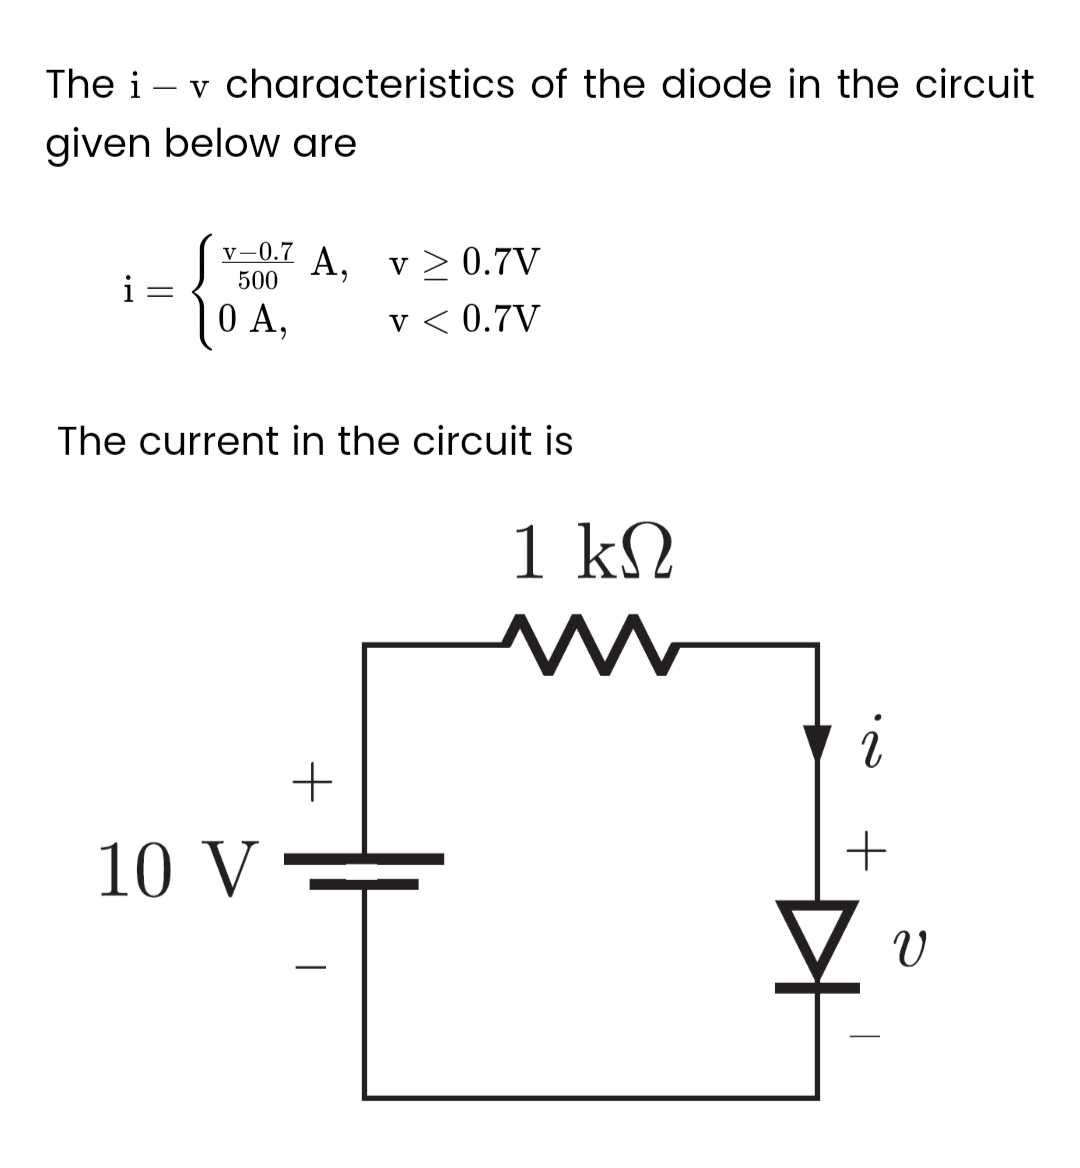 The i
given below are
i
-
v characteristics of the diode in the circuit
-
V-0.7 A,
500
0 A,
The current in the circuit is
10 V
v ≥ 0.7V
v < 0.7V
+
1 ΚΩ
M
i
+
1 v